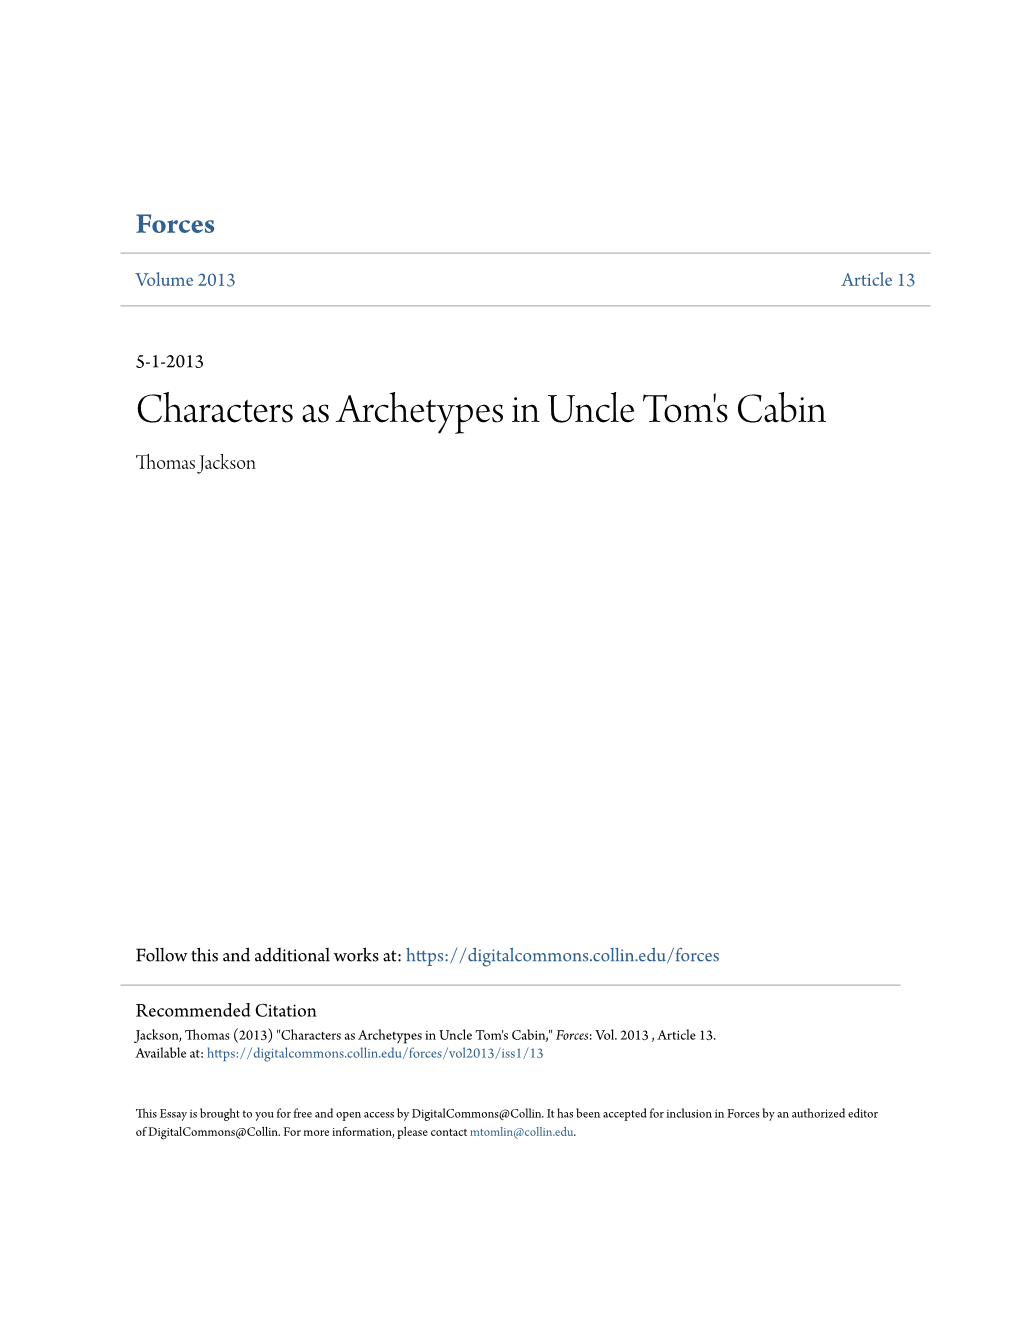 Characters As Archetypes in Uncle Tom's Cabin Thomas Jackson